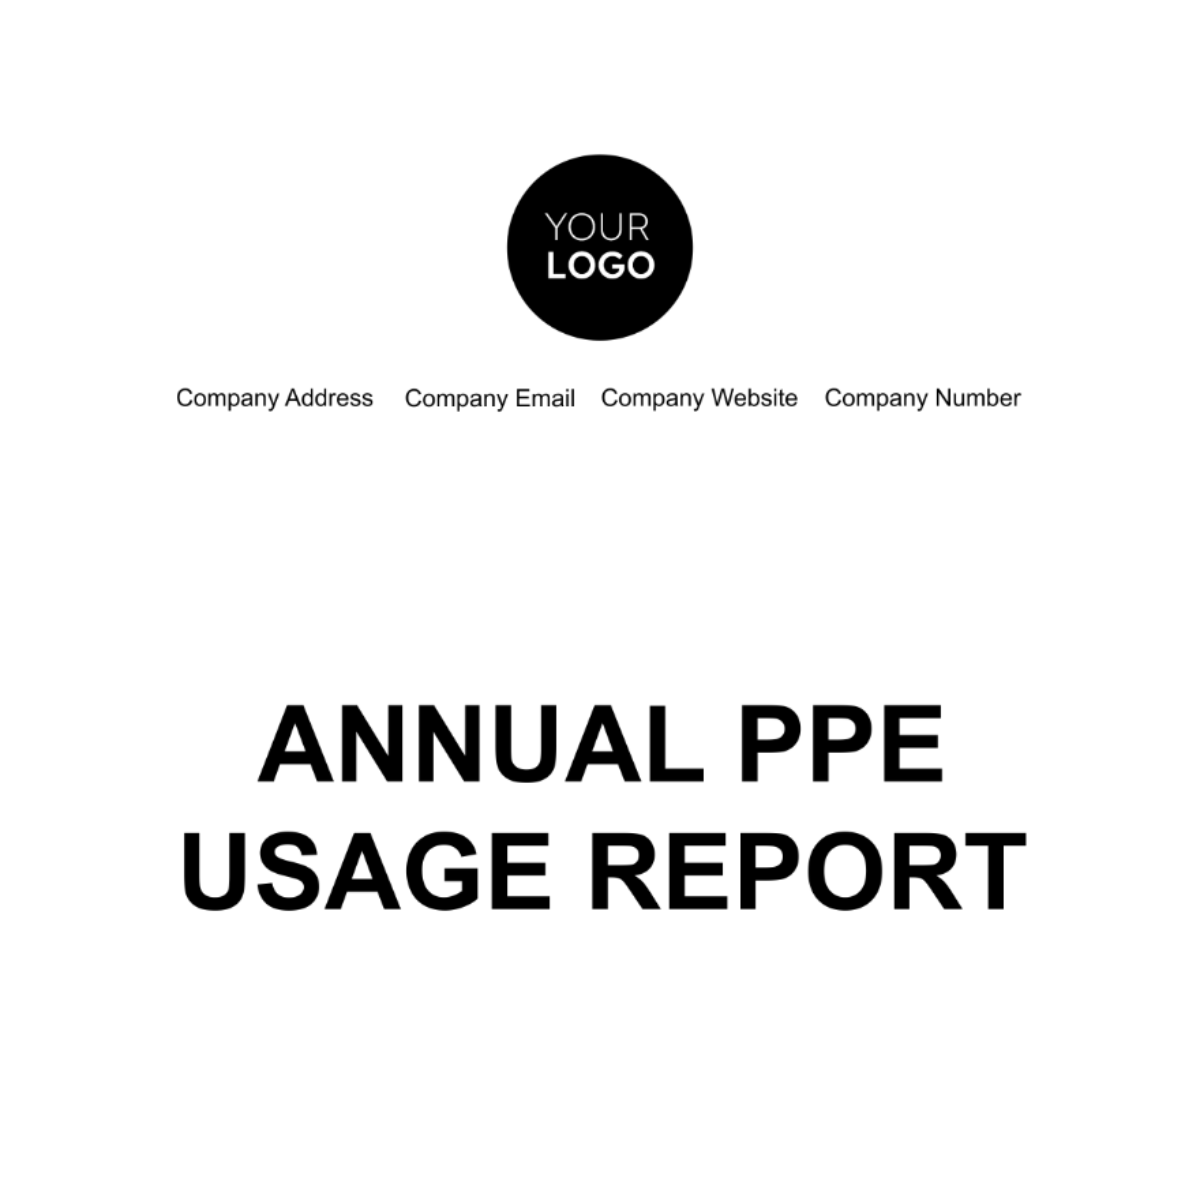 Annual PPE Usage Report Template